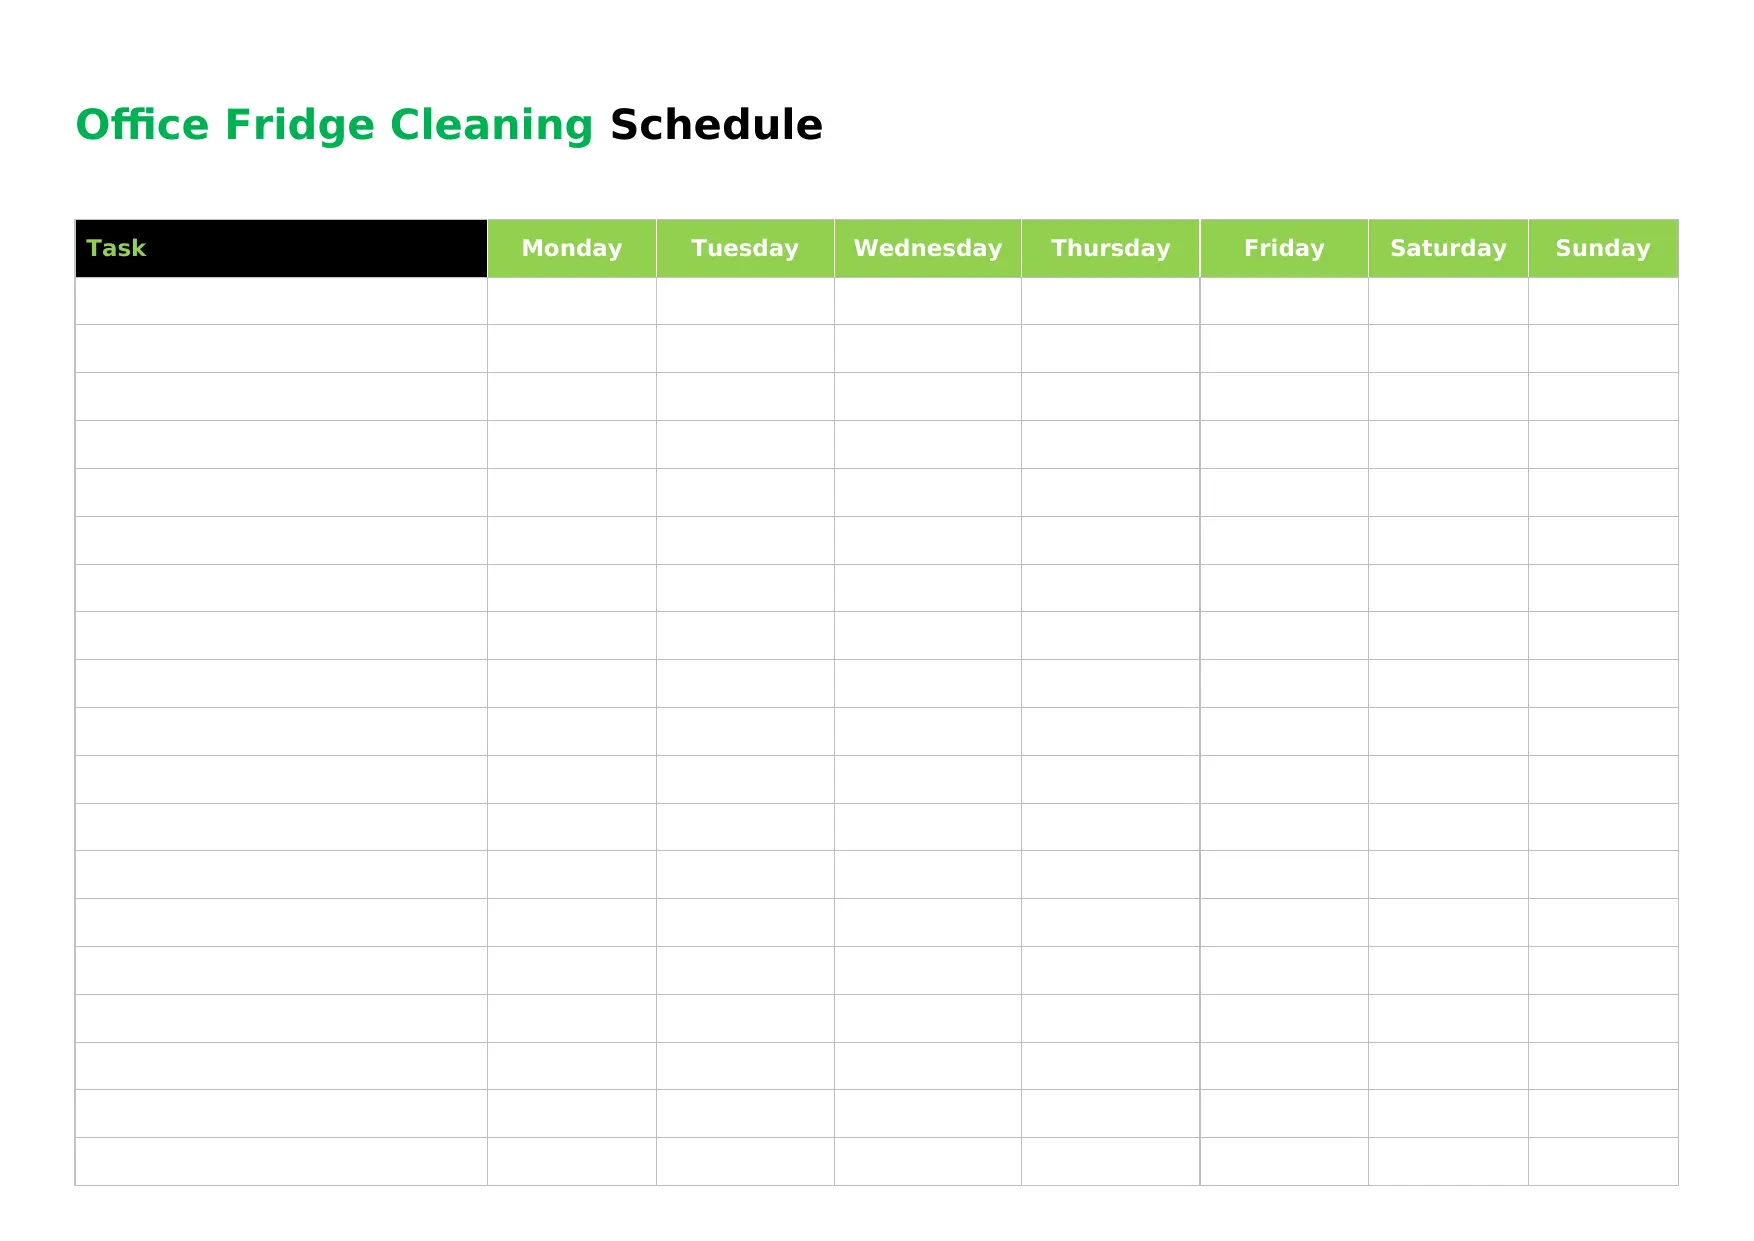 Office Fridge Cleaning Schedule Template